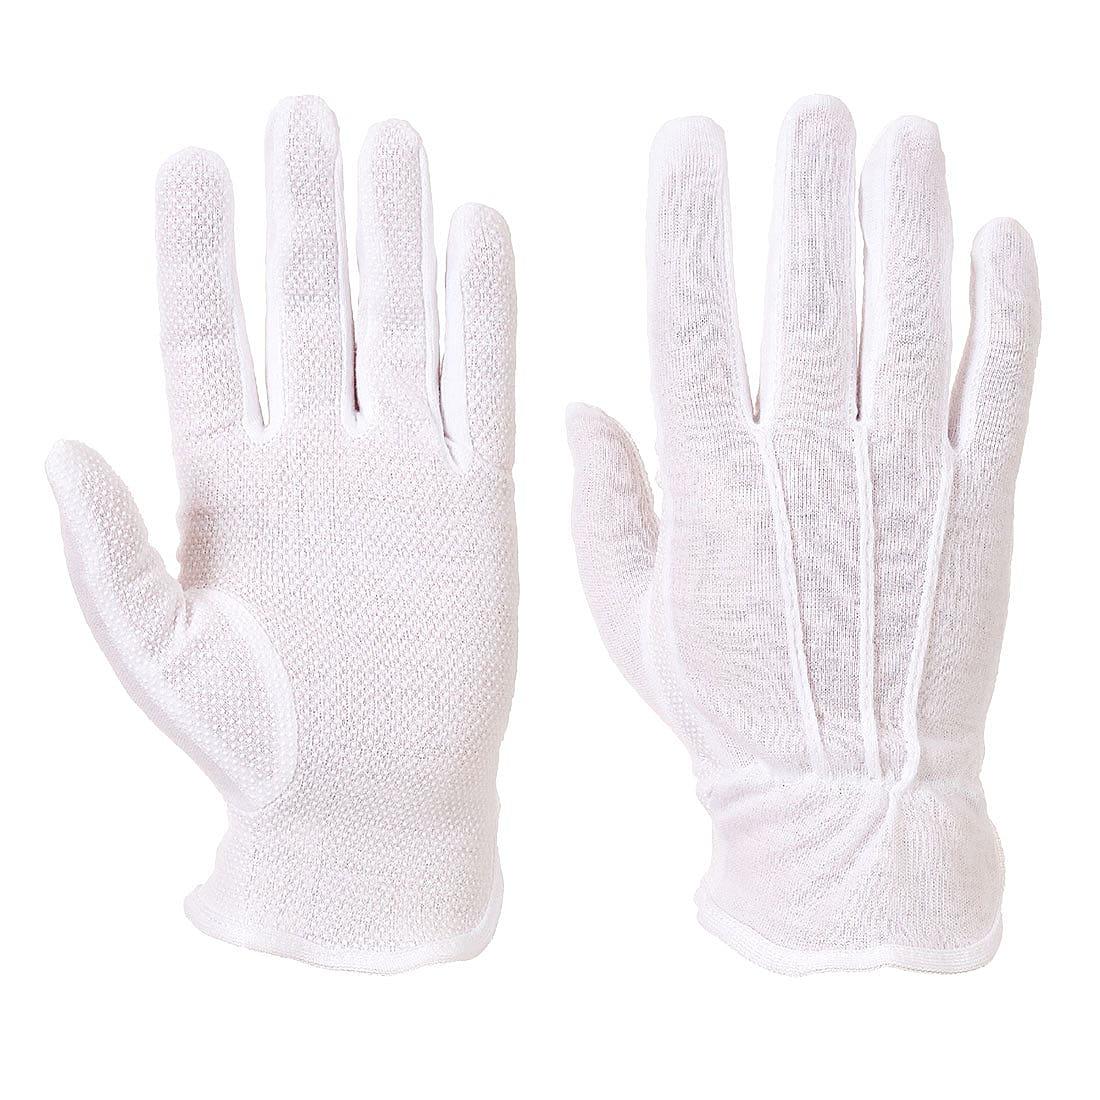 Portwest Microdot Gloves in White (Product Code: A080)